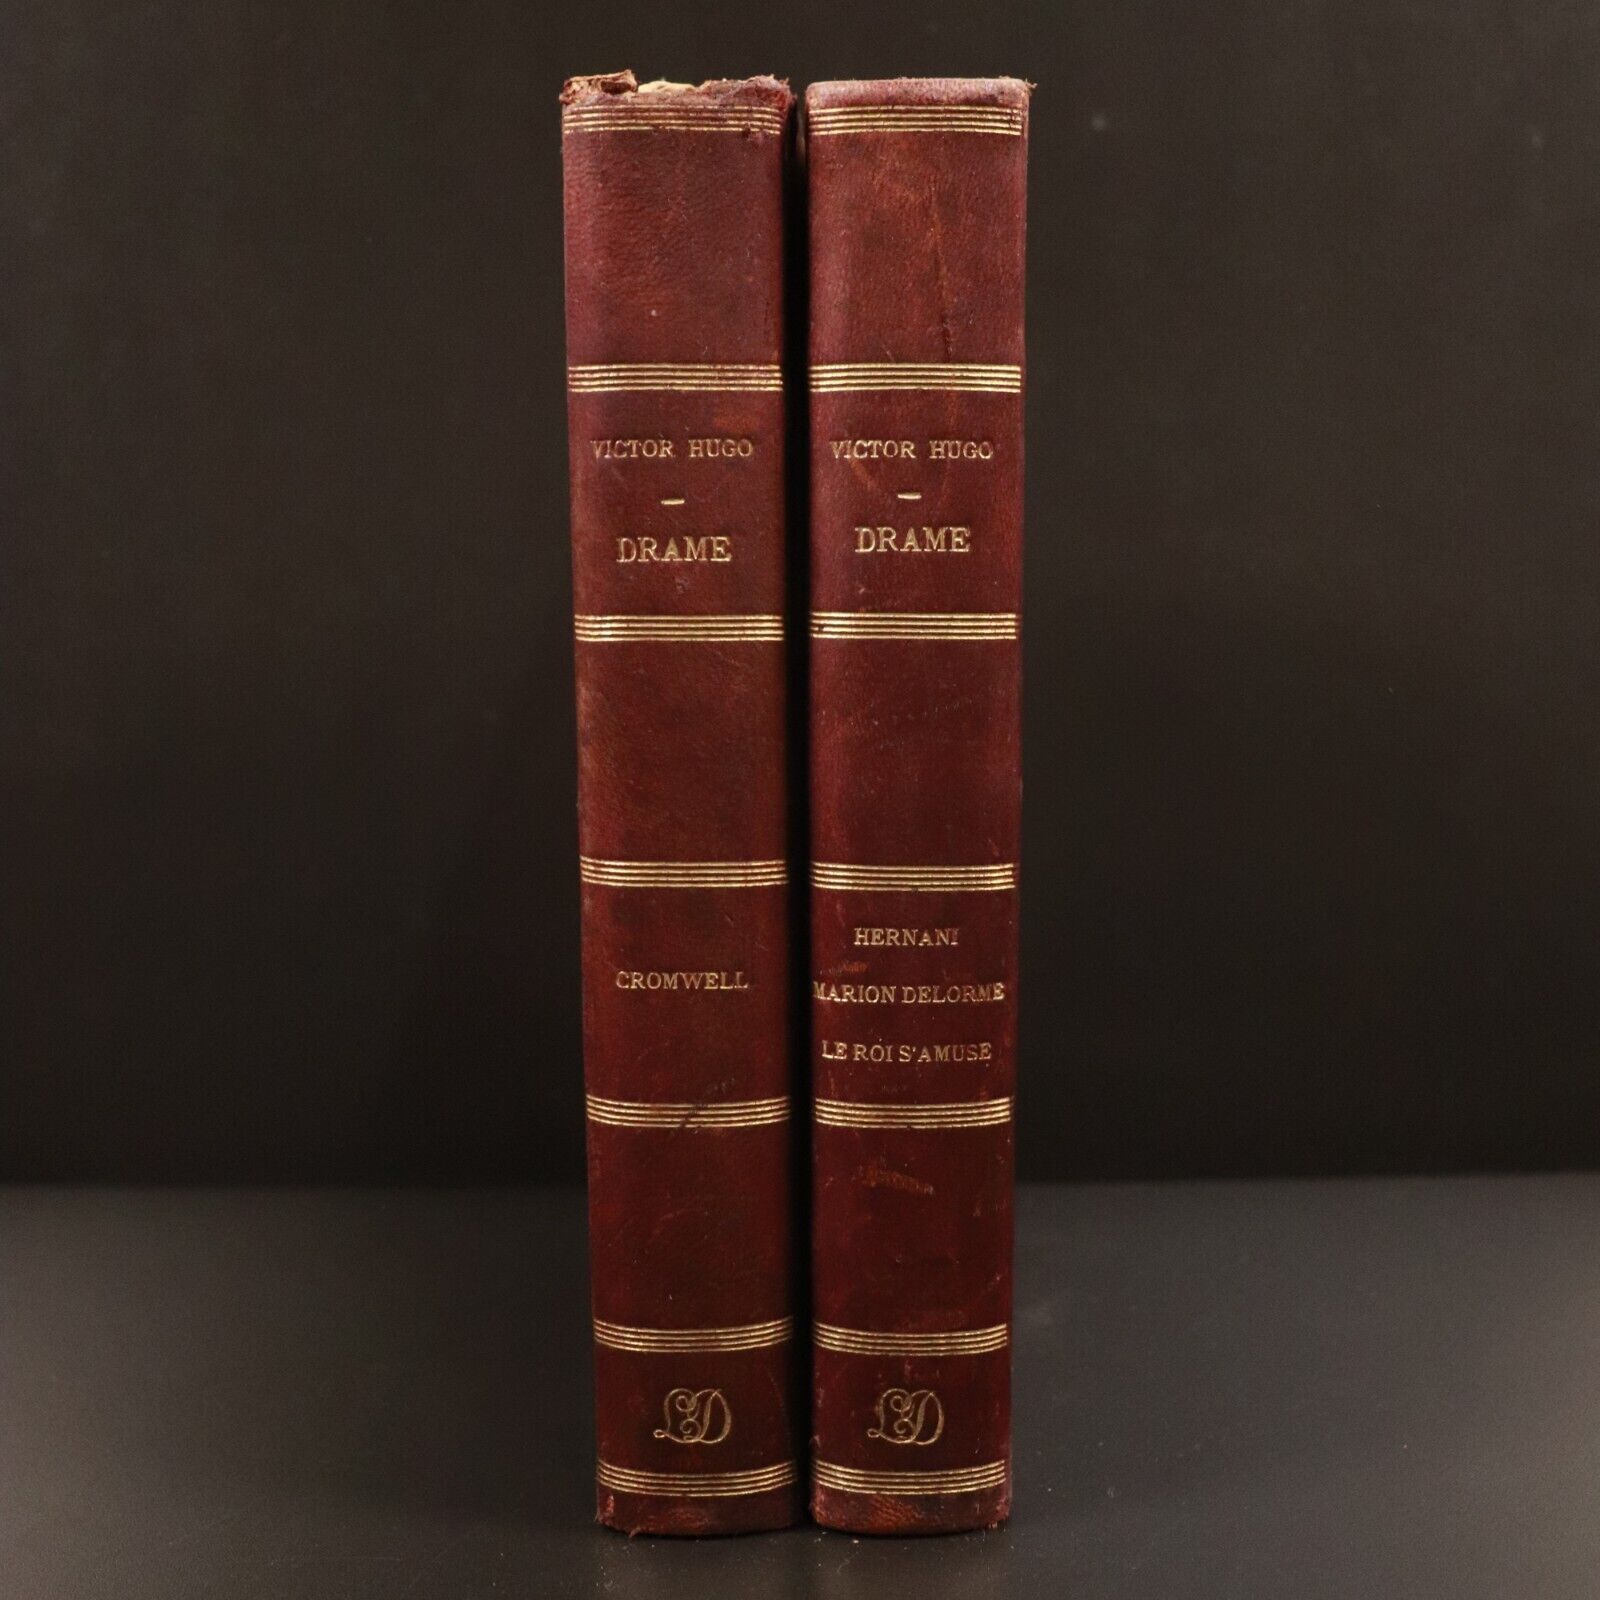 1875 2vol Oeuvres Victor Hugo Drame Cromwell Hernani Marion Delorme Book Set - 0